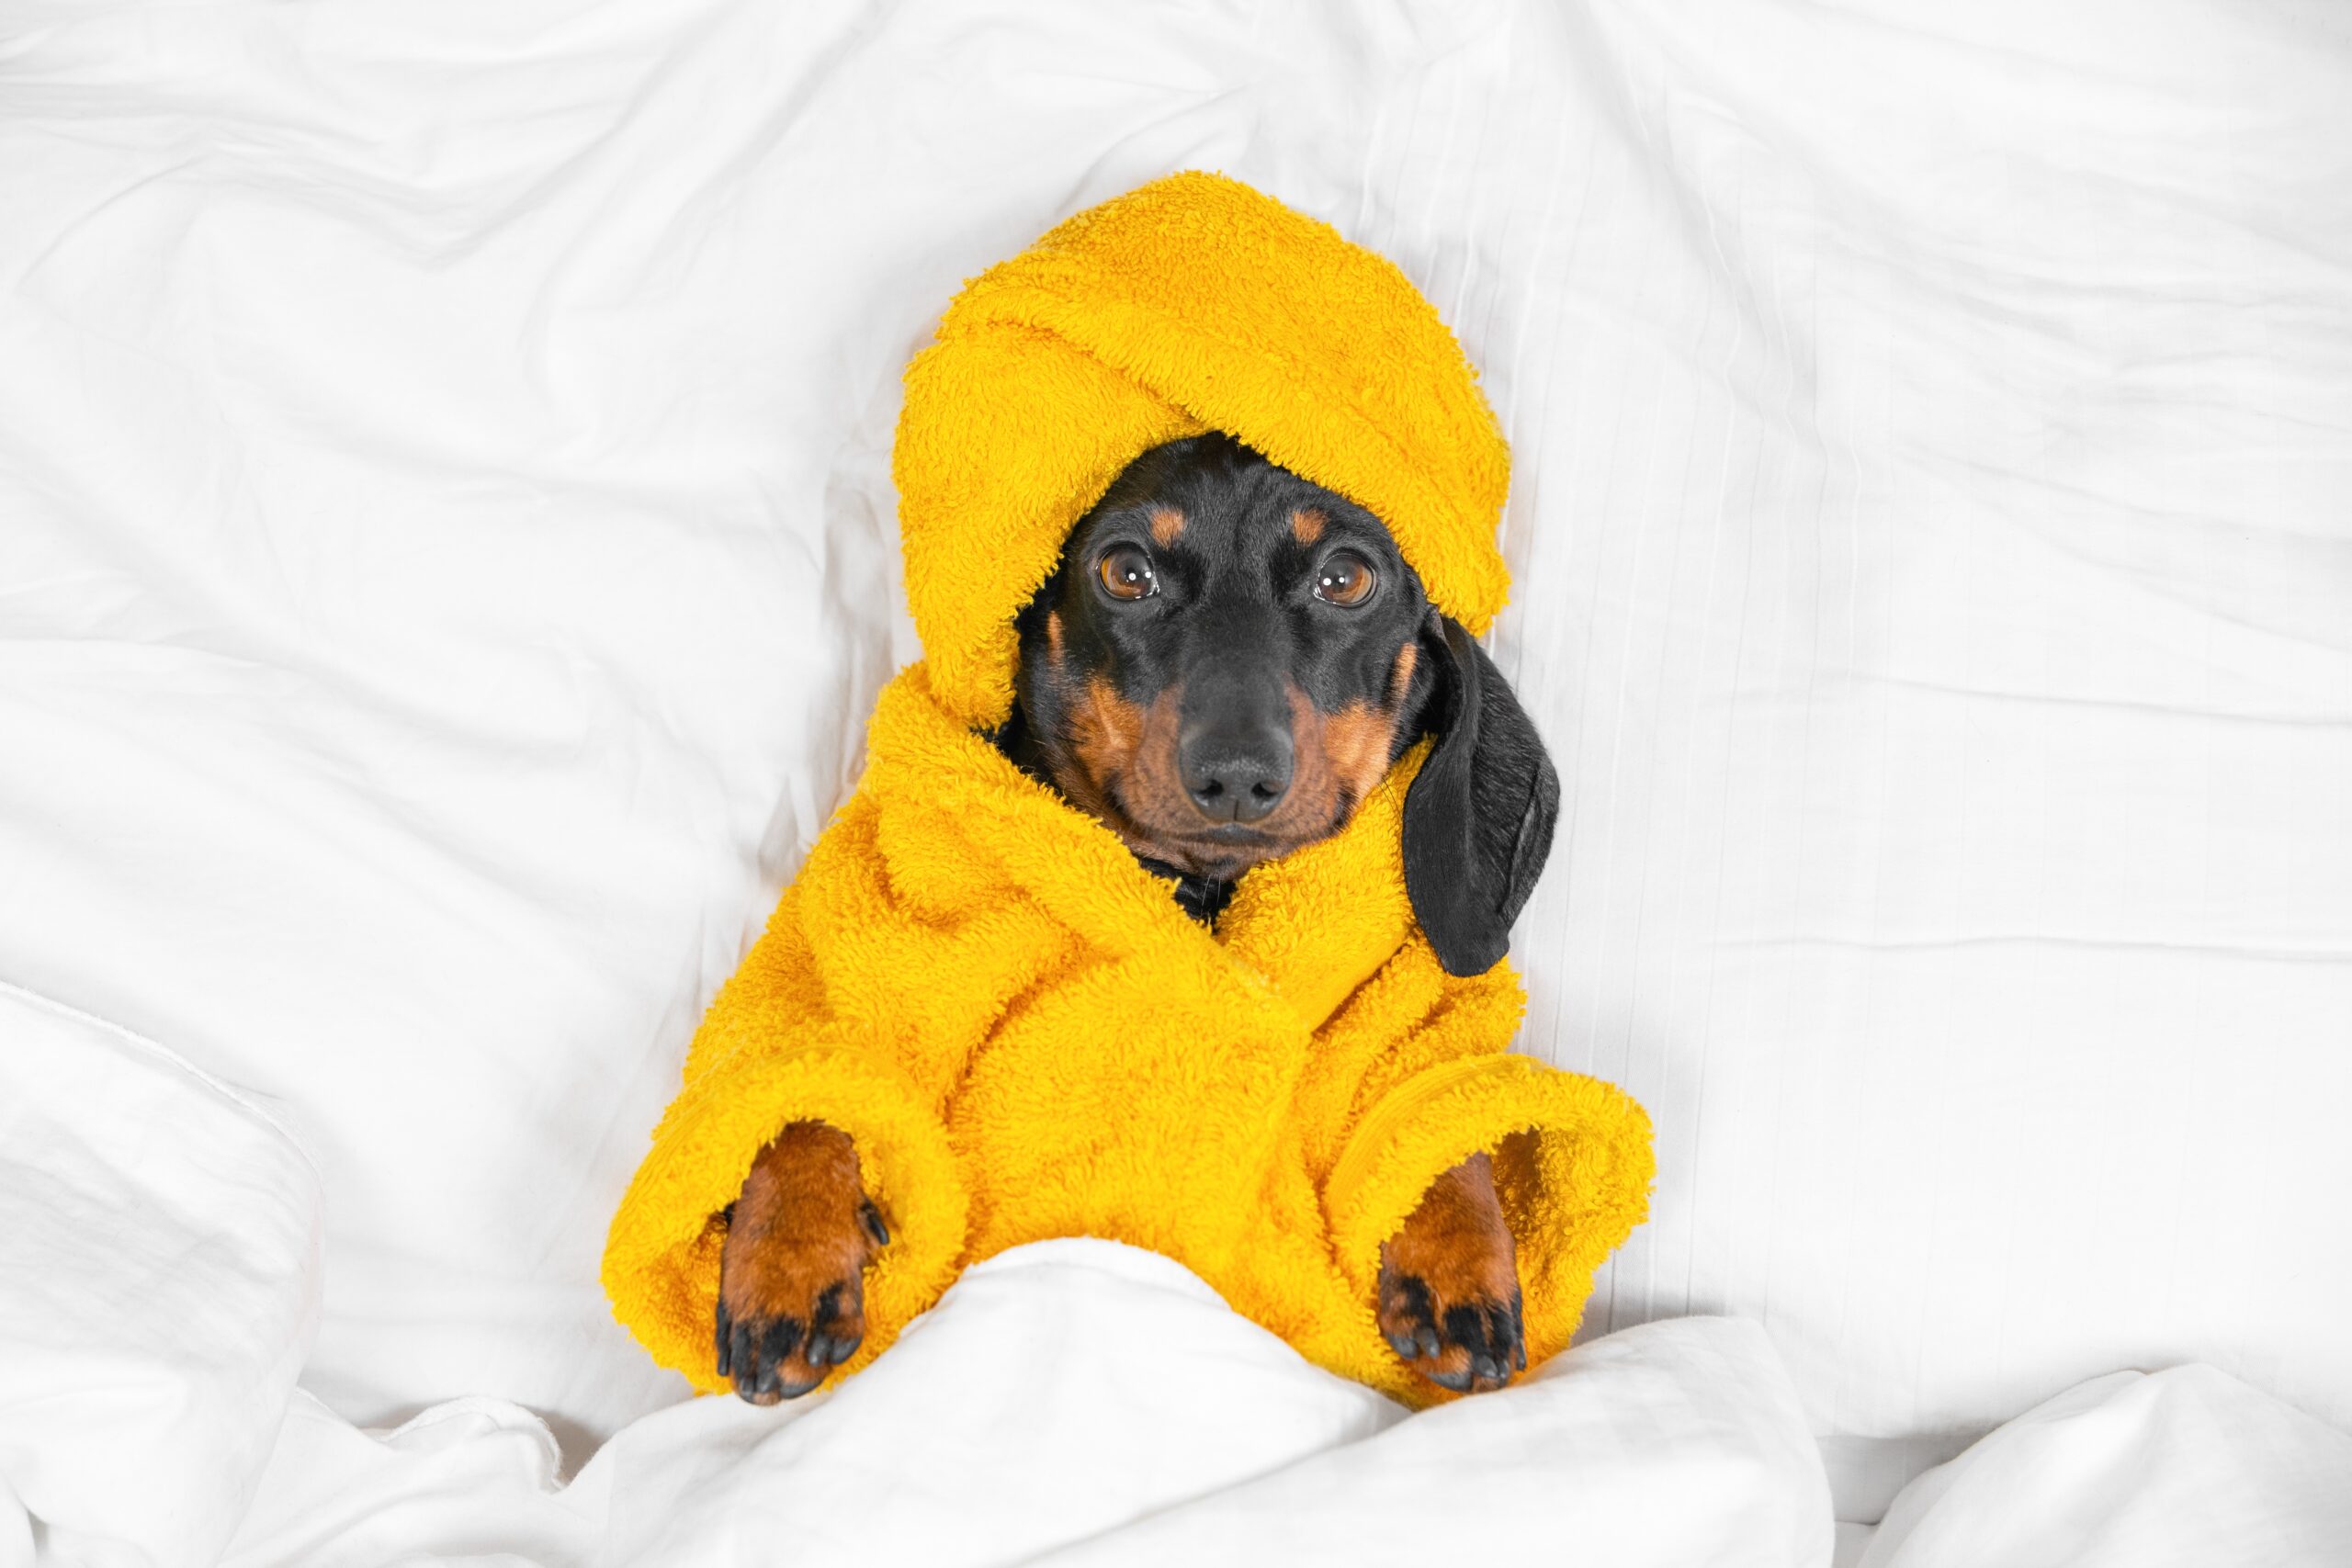 Dachshund,Puppy,In,Bathrobe,And,With,Yellow,Towel,Wrapped,Around